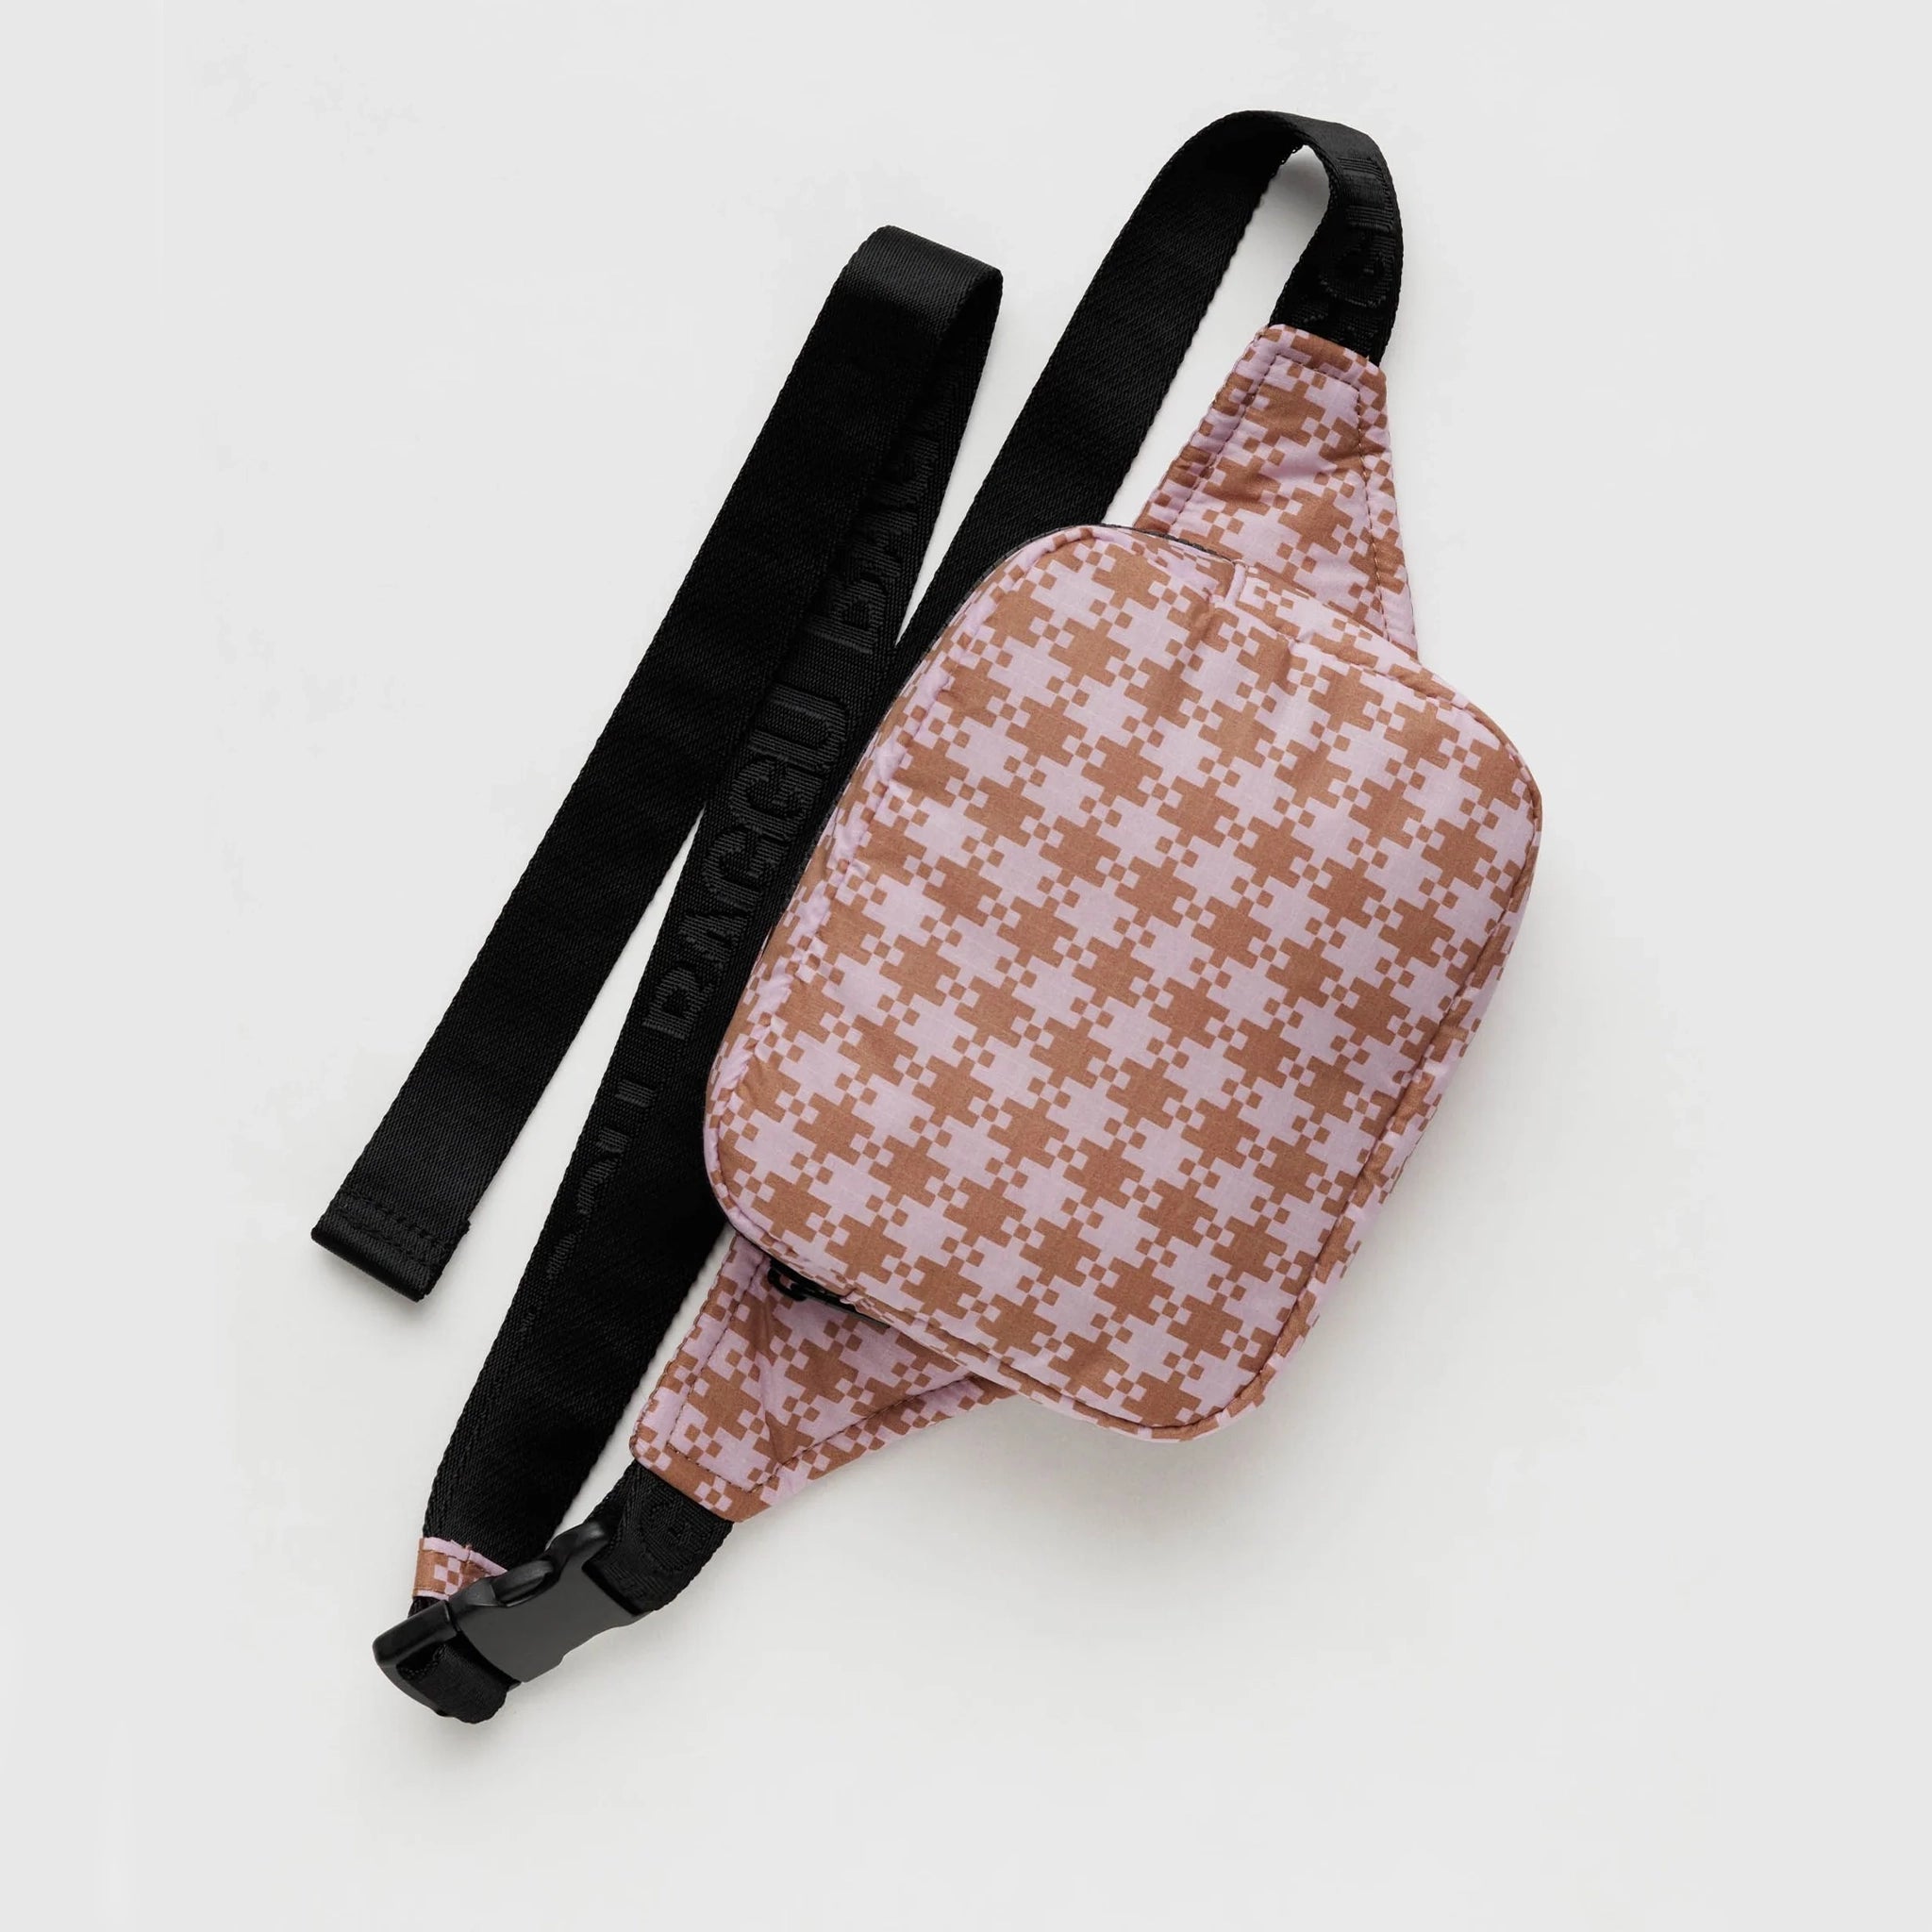 On a white background is a fanny pack with a brown and pink gingham pattern and a black adjustable strap.